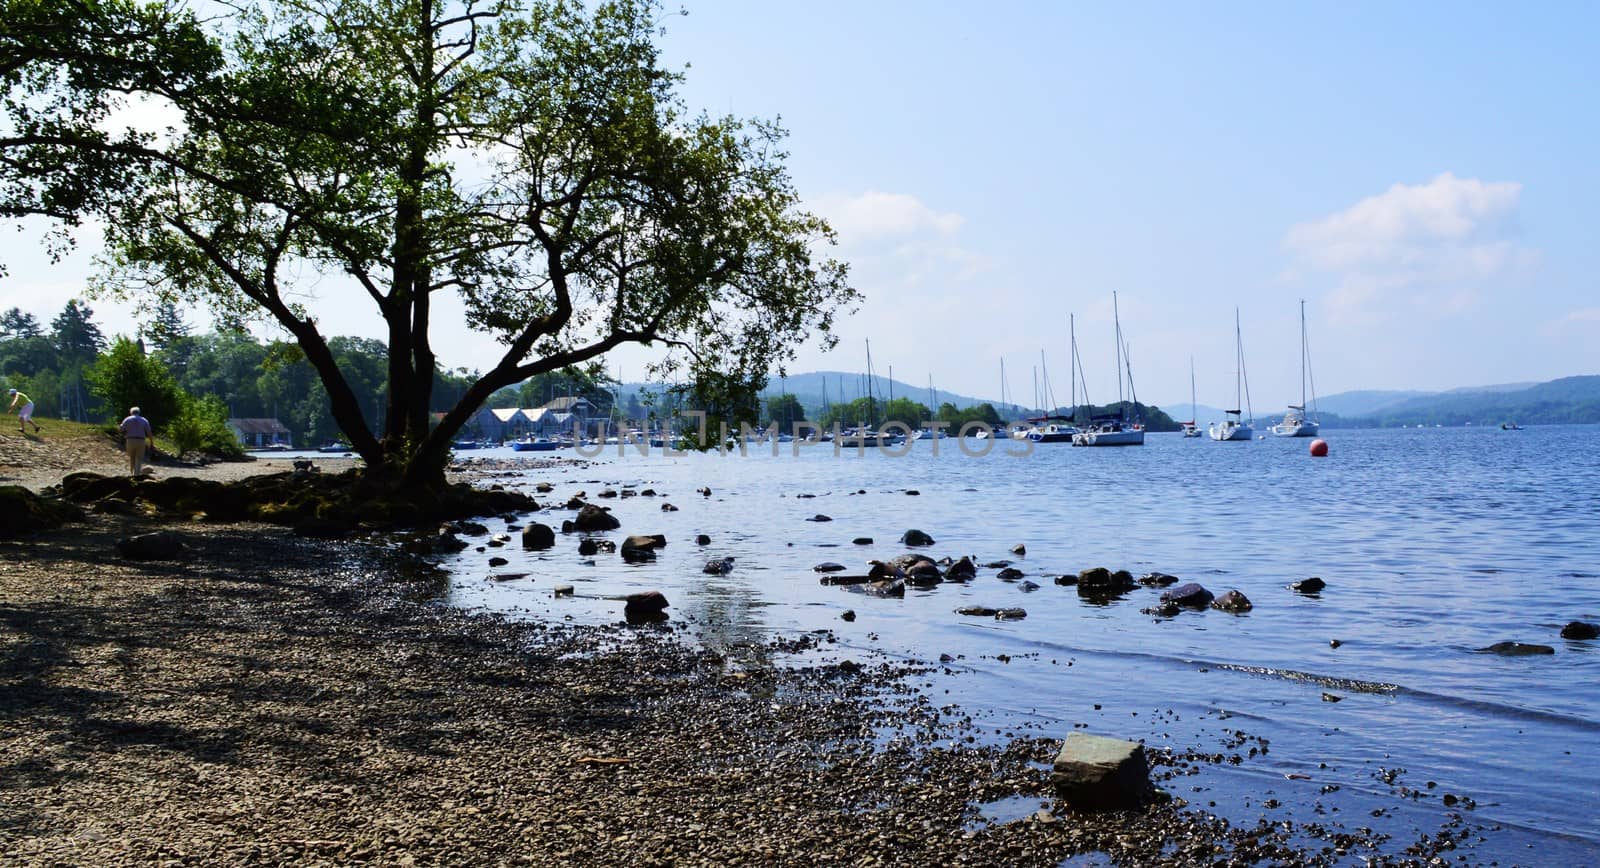 An image taken from the shore of Lake Windermere in the English Lake District.